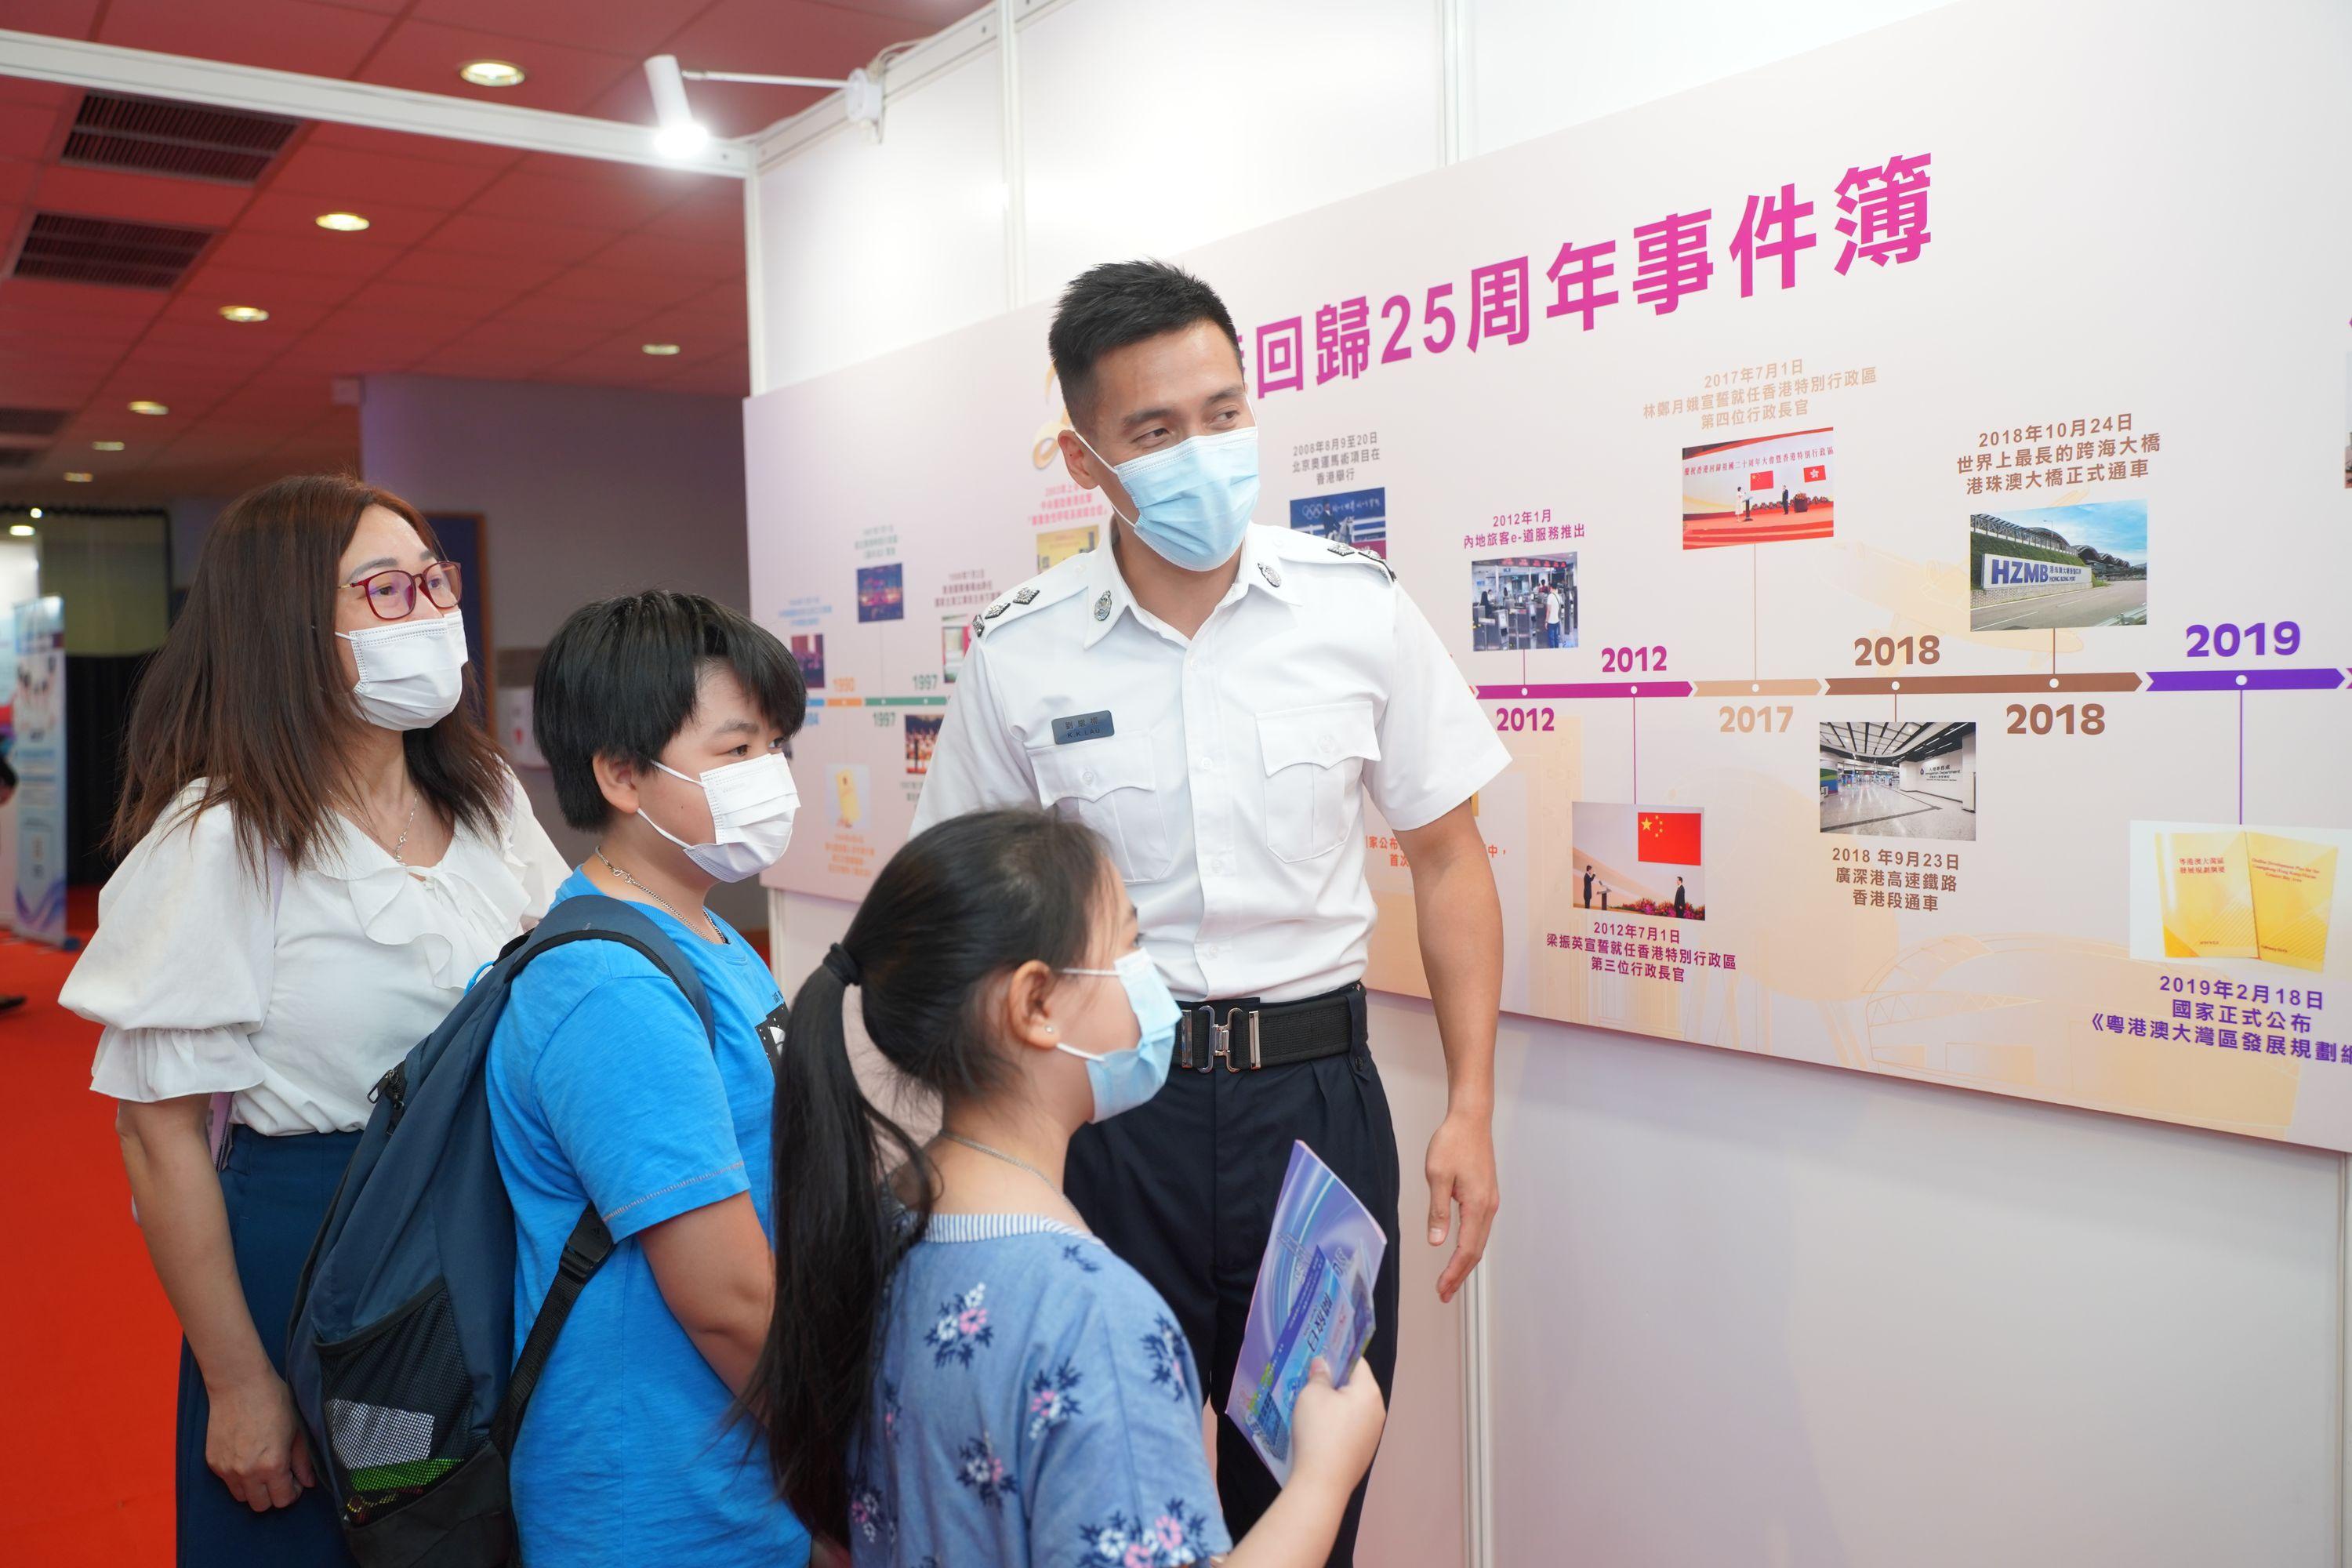 The Immigration Service Institute of Training and Development held an Open Day today (October 29). Photo shows members of the public touring the exhibition booths during the Open Day.